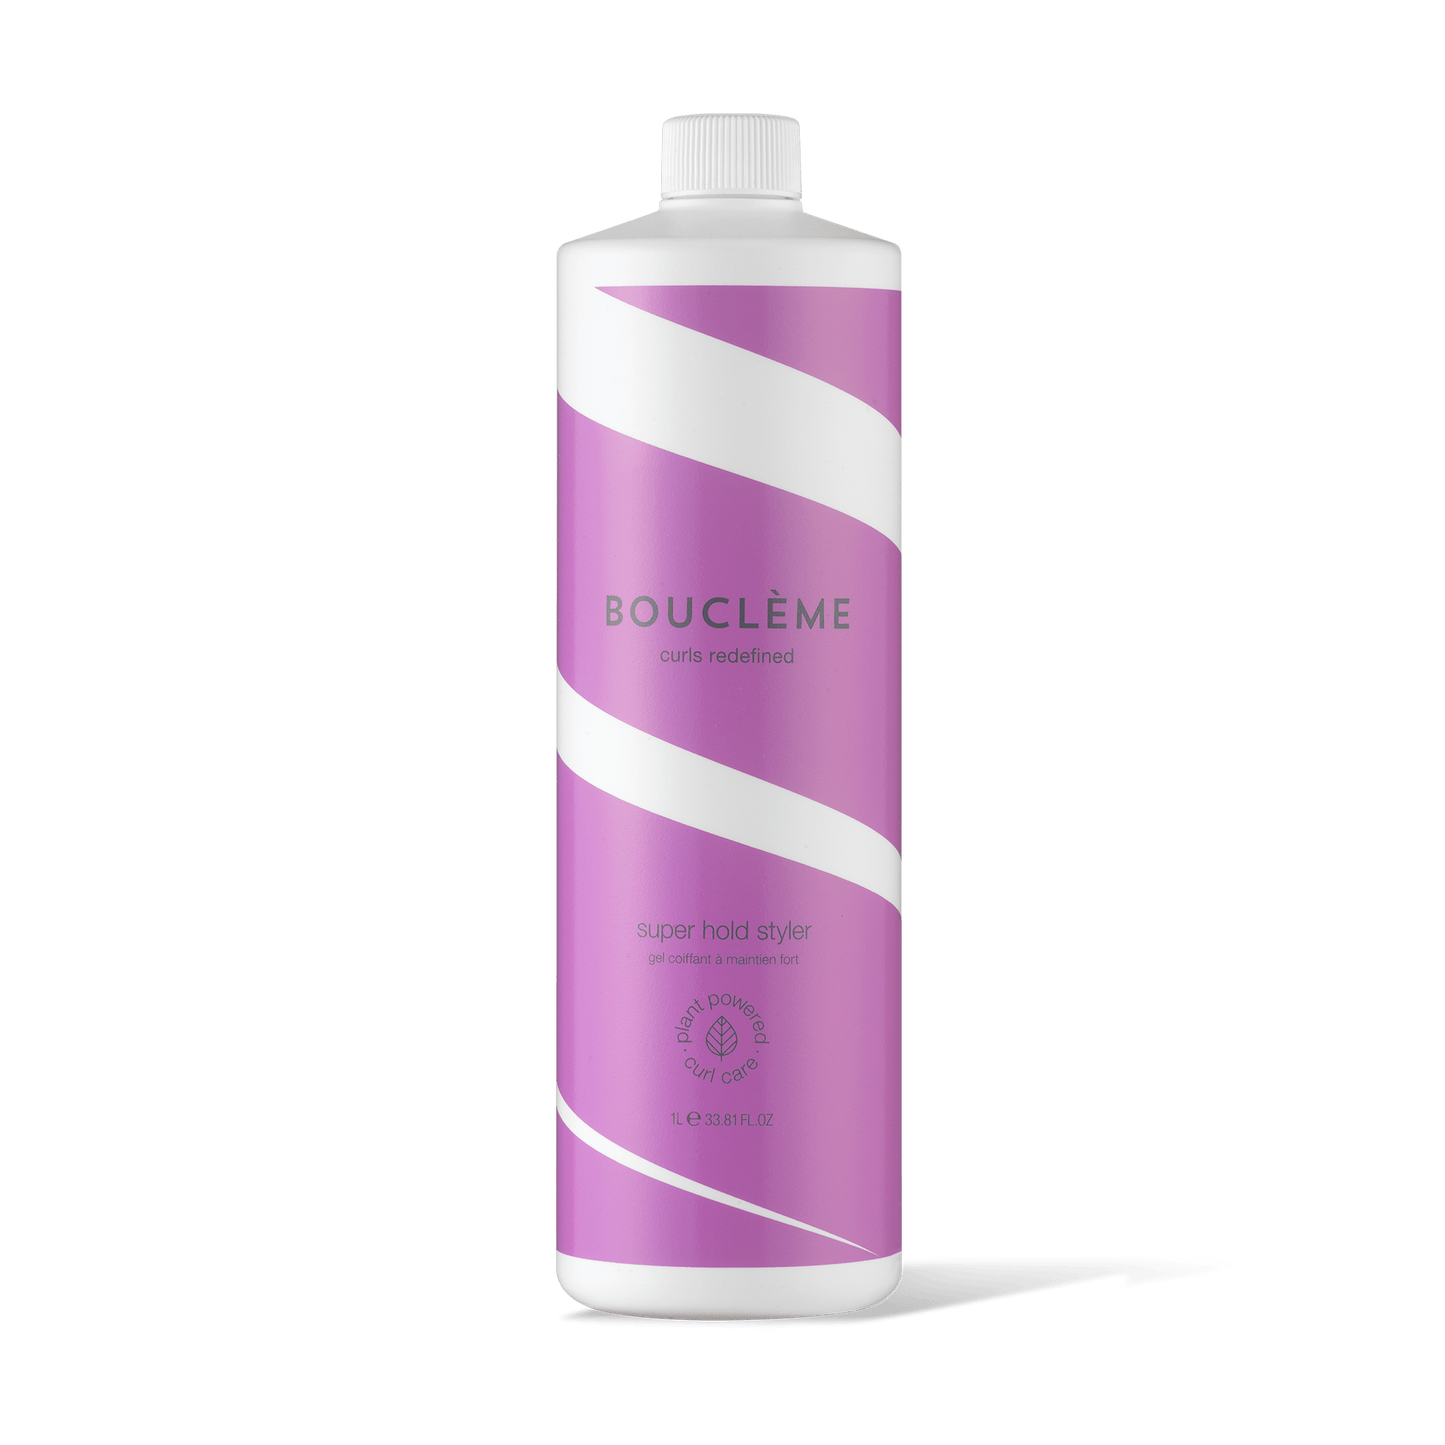 The ultimate curly hair gel for definition and firm hold, to keep your curls in shape on a busy day.